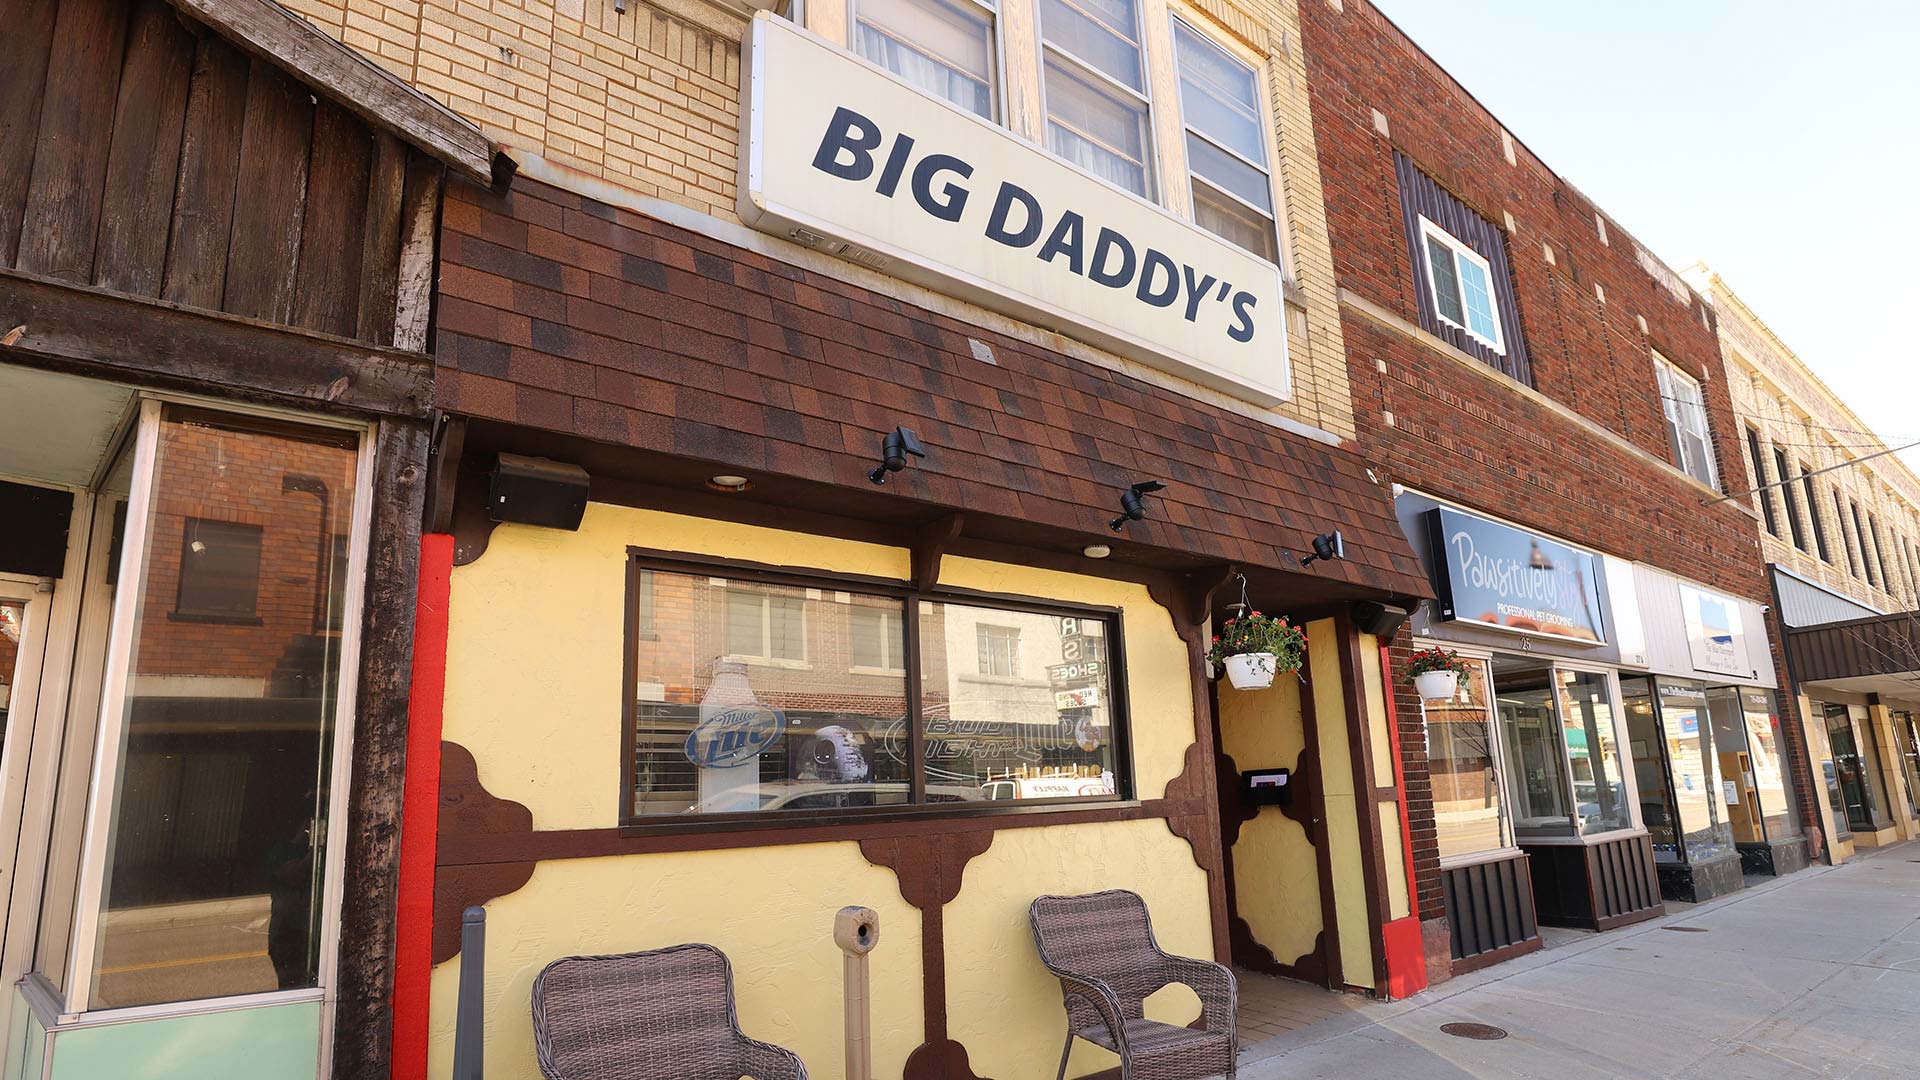 Exterior of Big Daddy's with sign